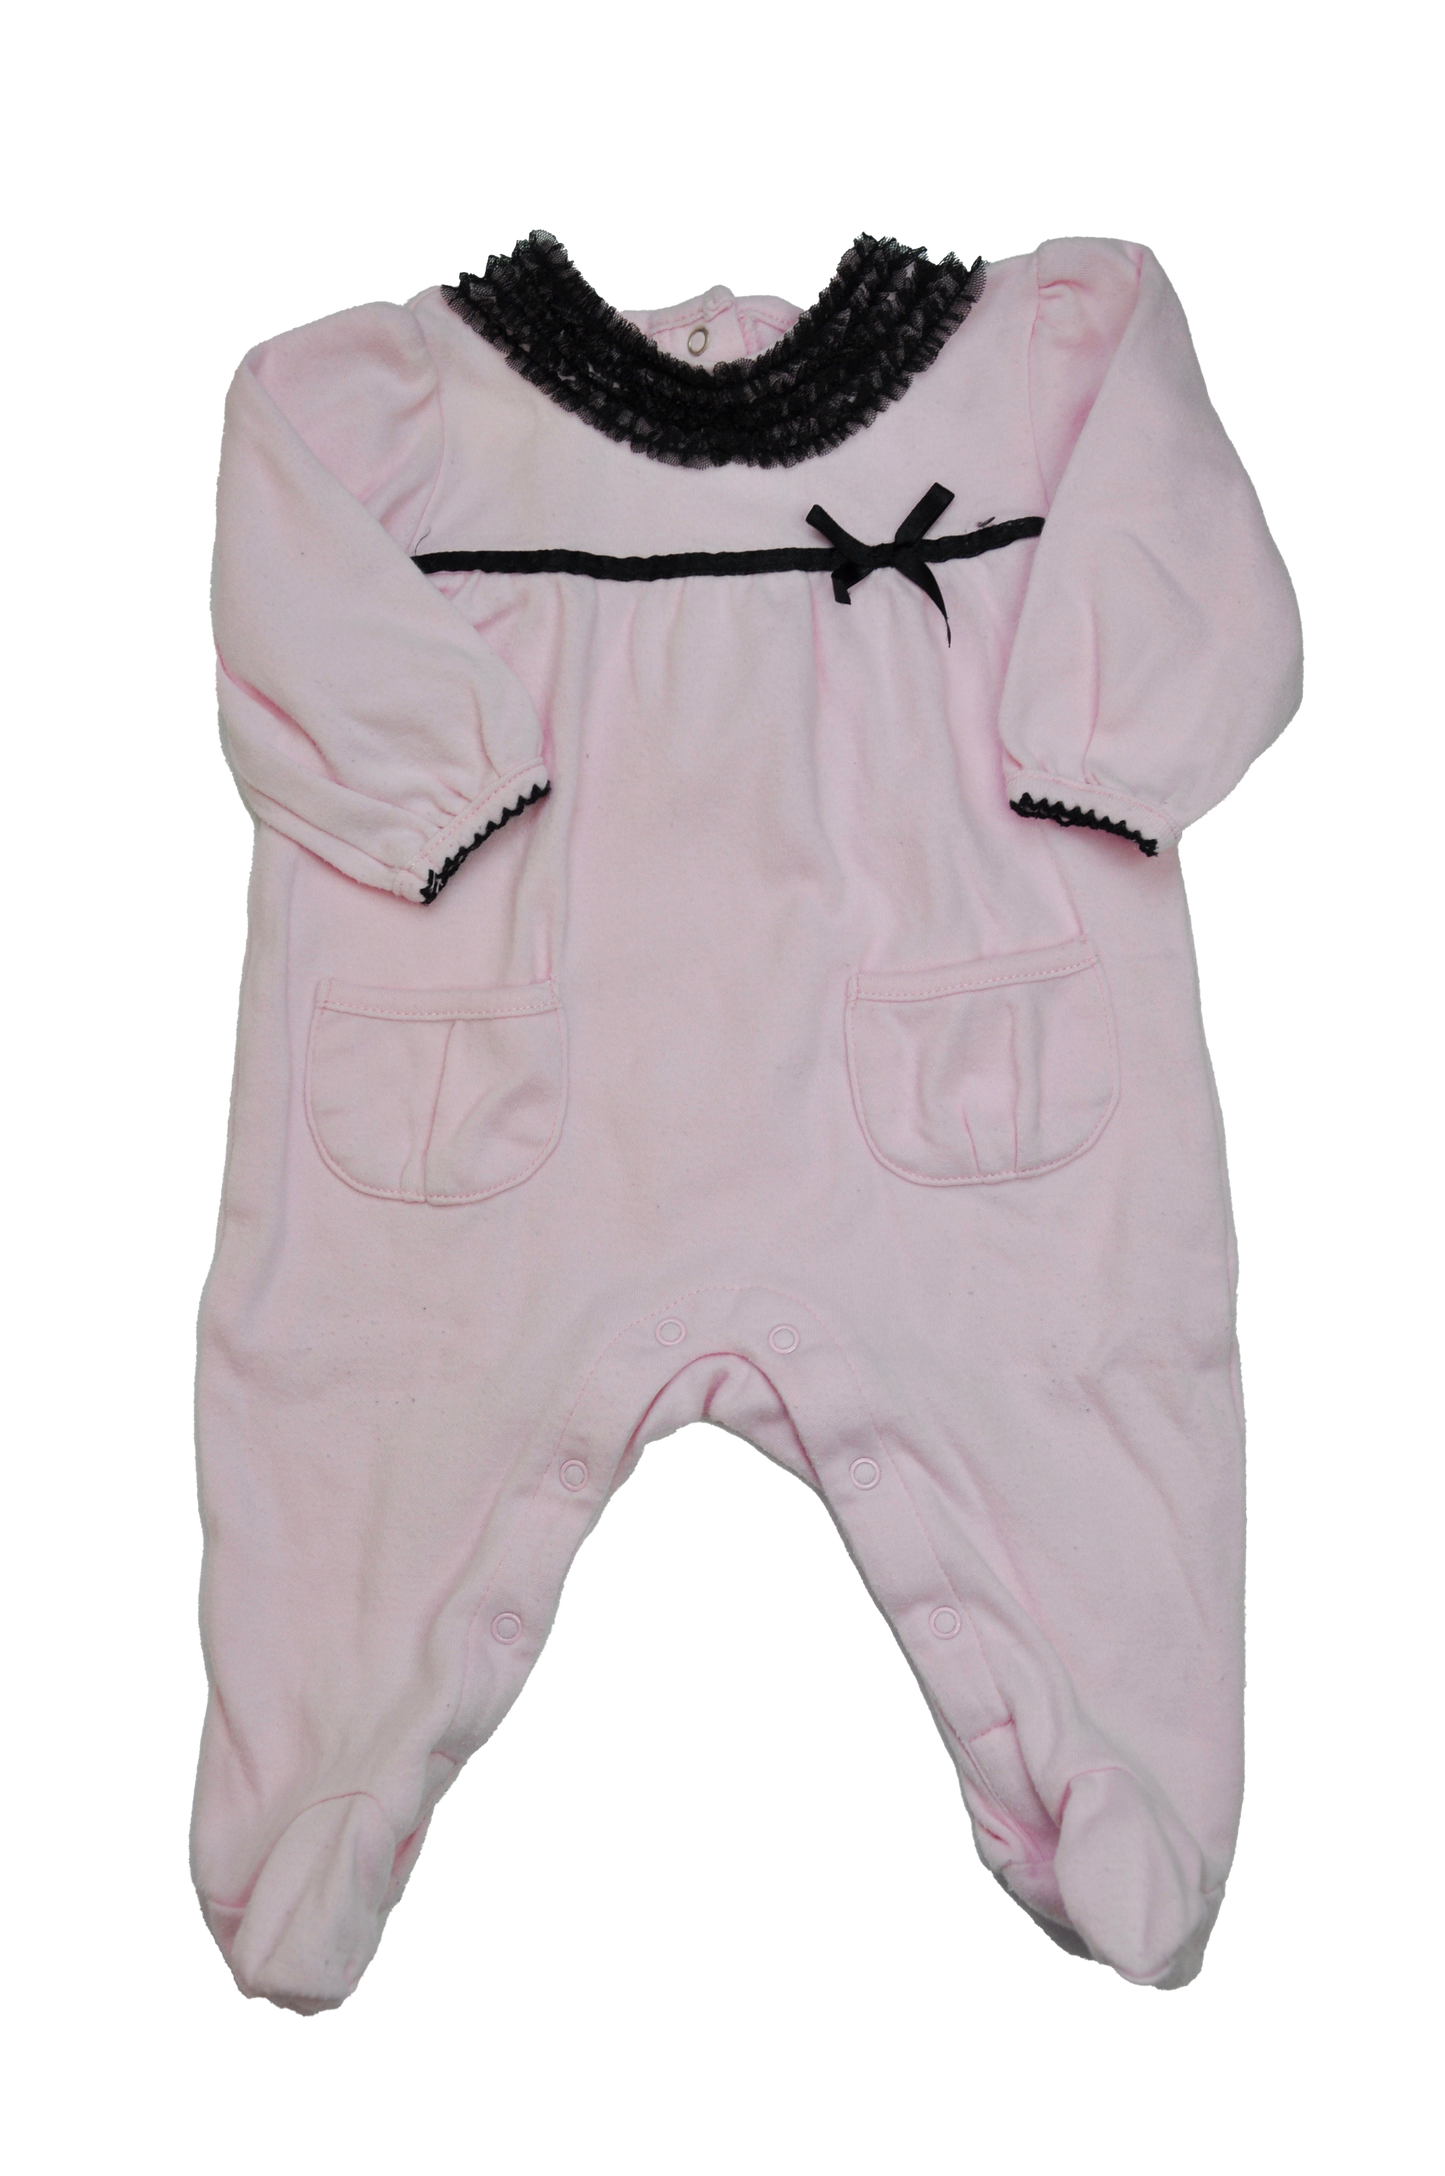 George Pink Footed Sleeper with Black Frilly Collar 6M